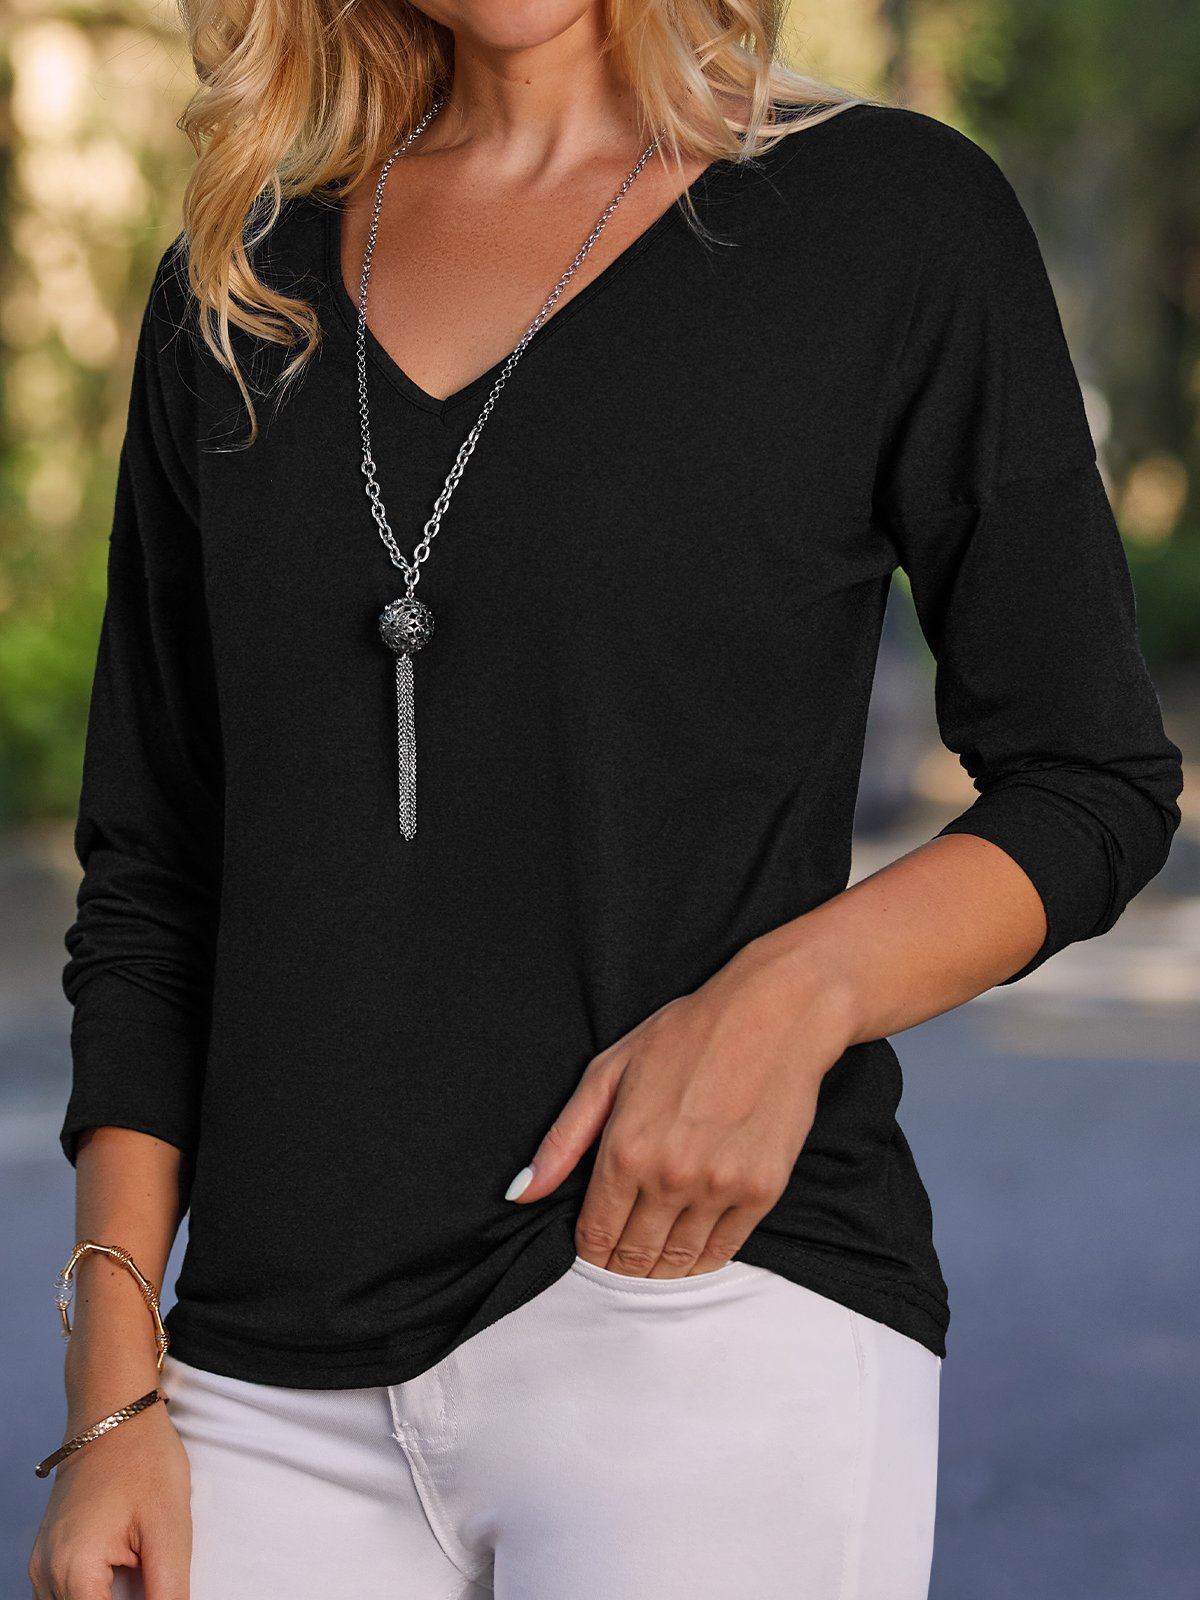 Casual Mujer Multicolor Liso Jersey Top Blusa Camisa 